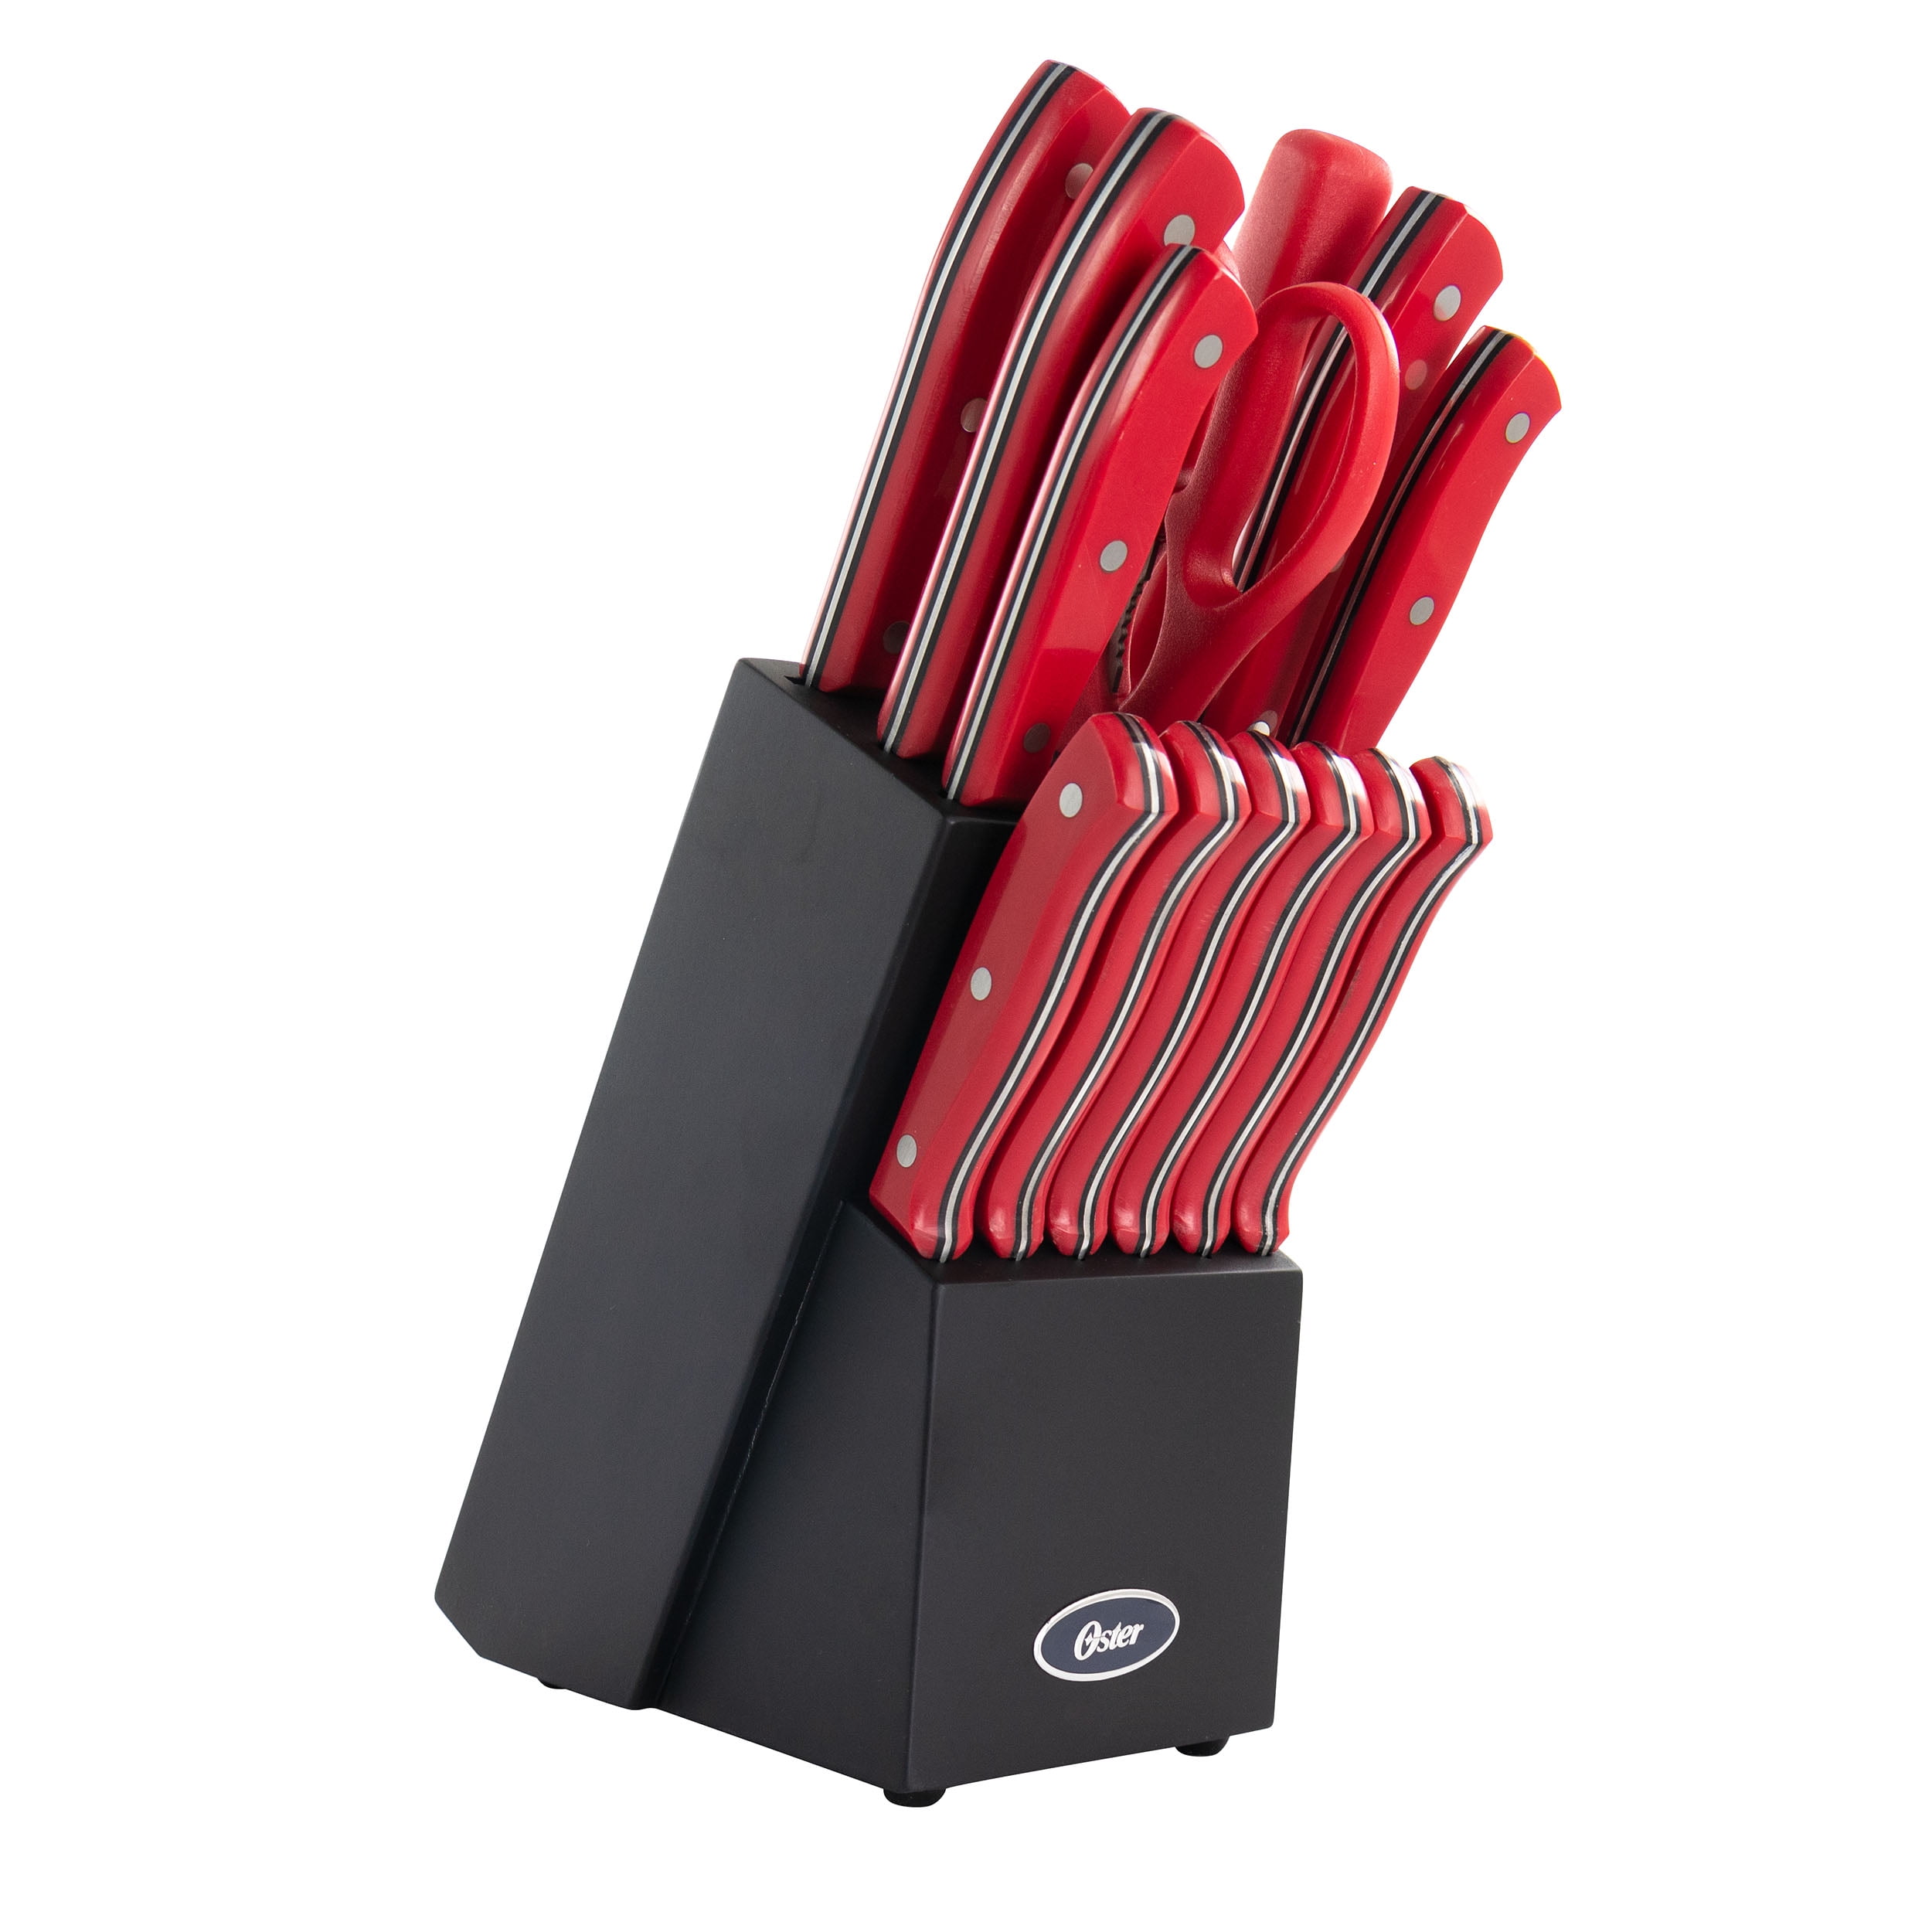 Sunbeam Cutlery 22 PC Block Set Stainless Steel Red Knives Collection –  Kitchen & Restaurant Supplies